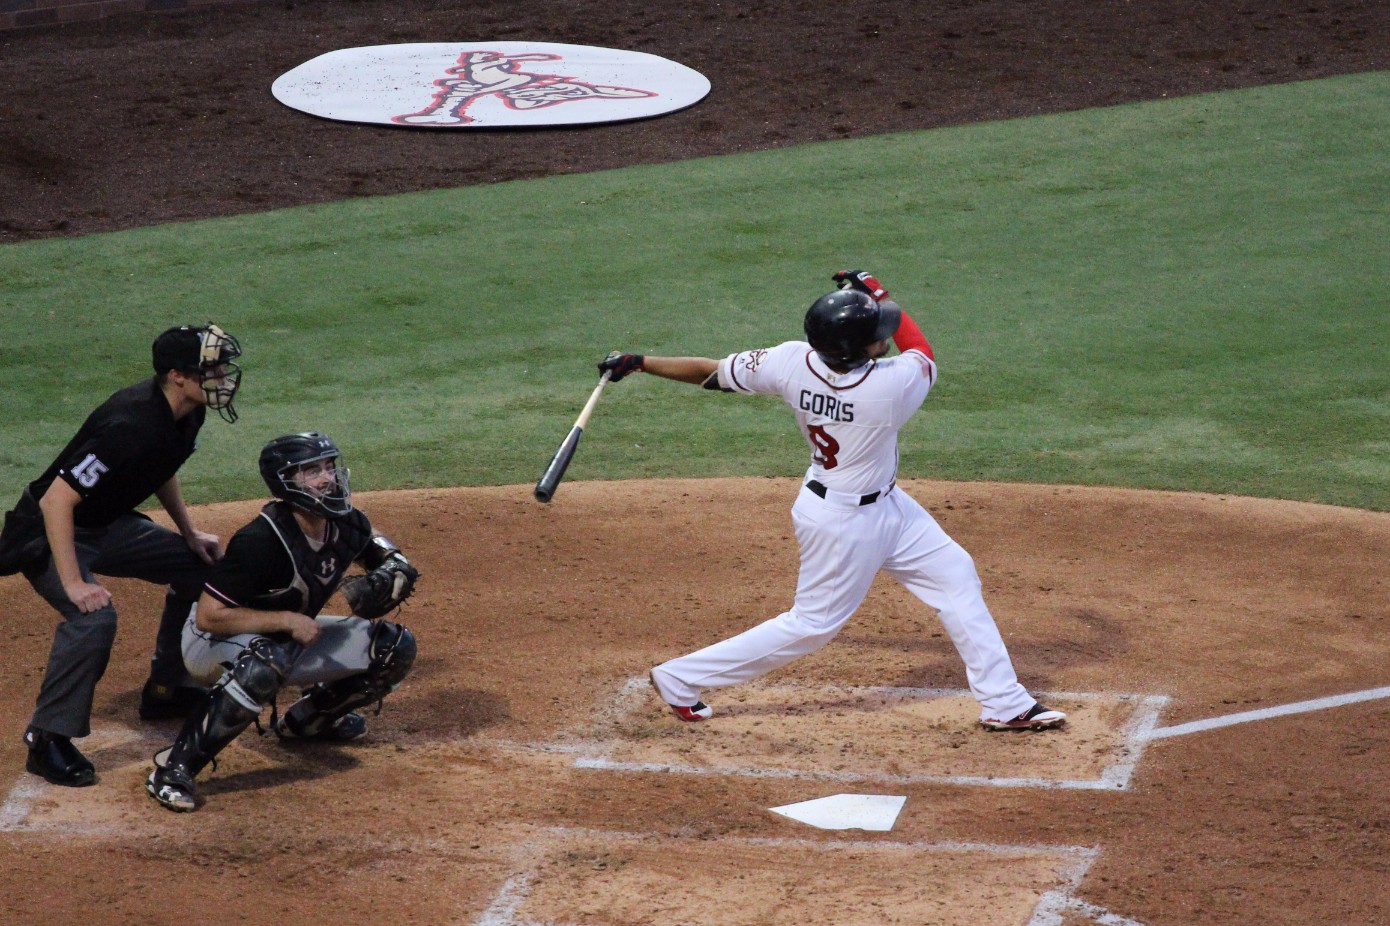 Chihuahuas complete series win over Isotopes Friday